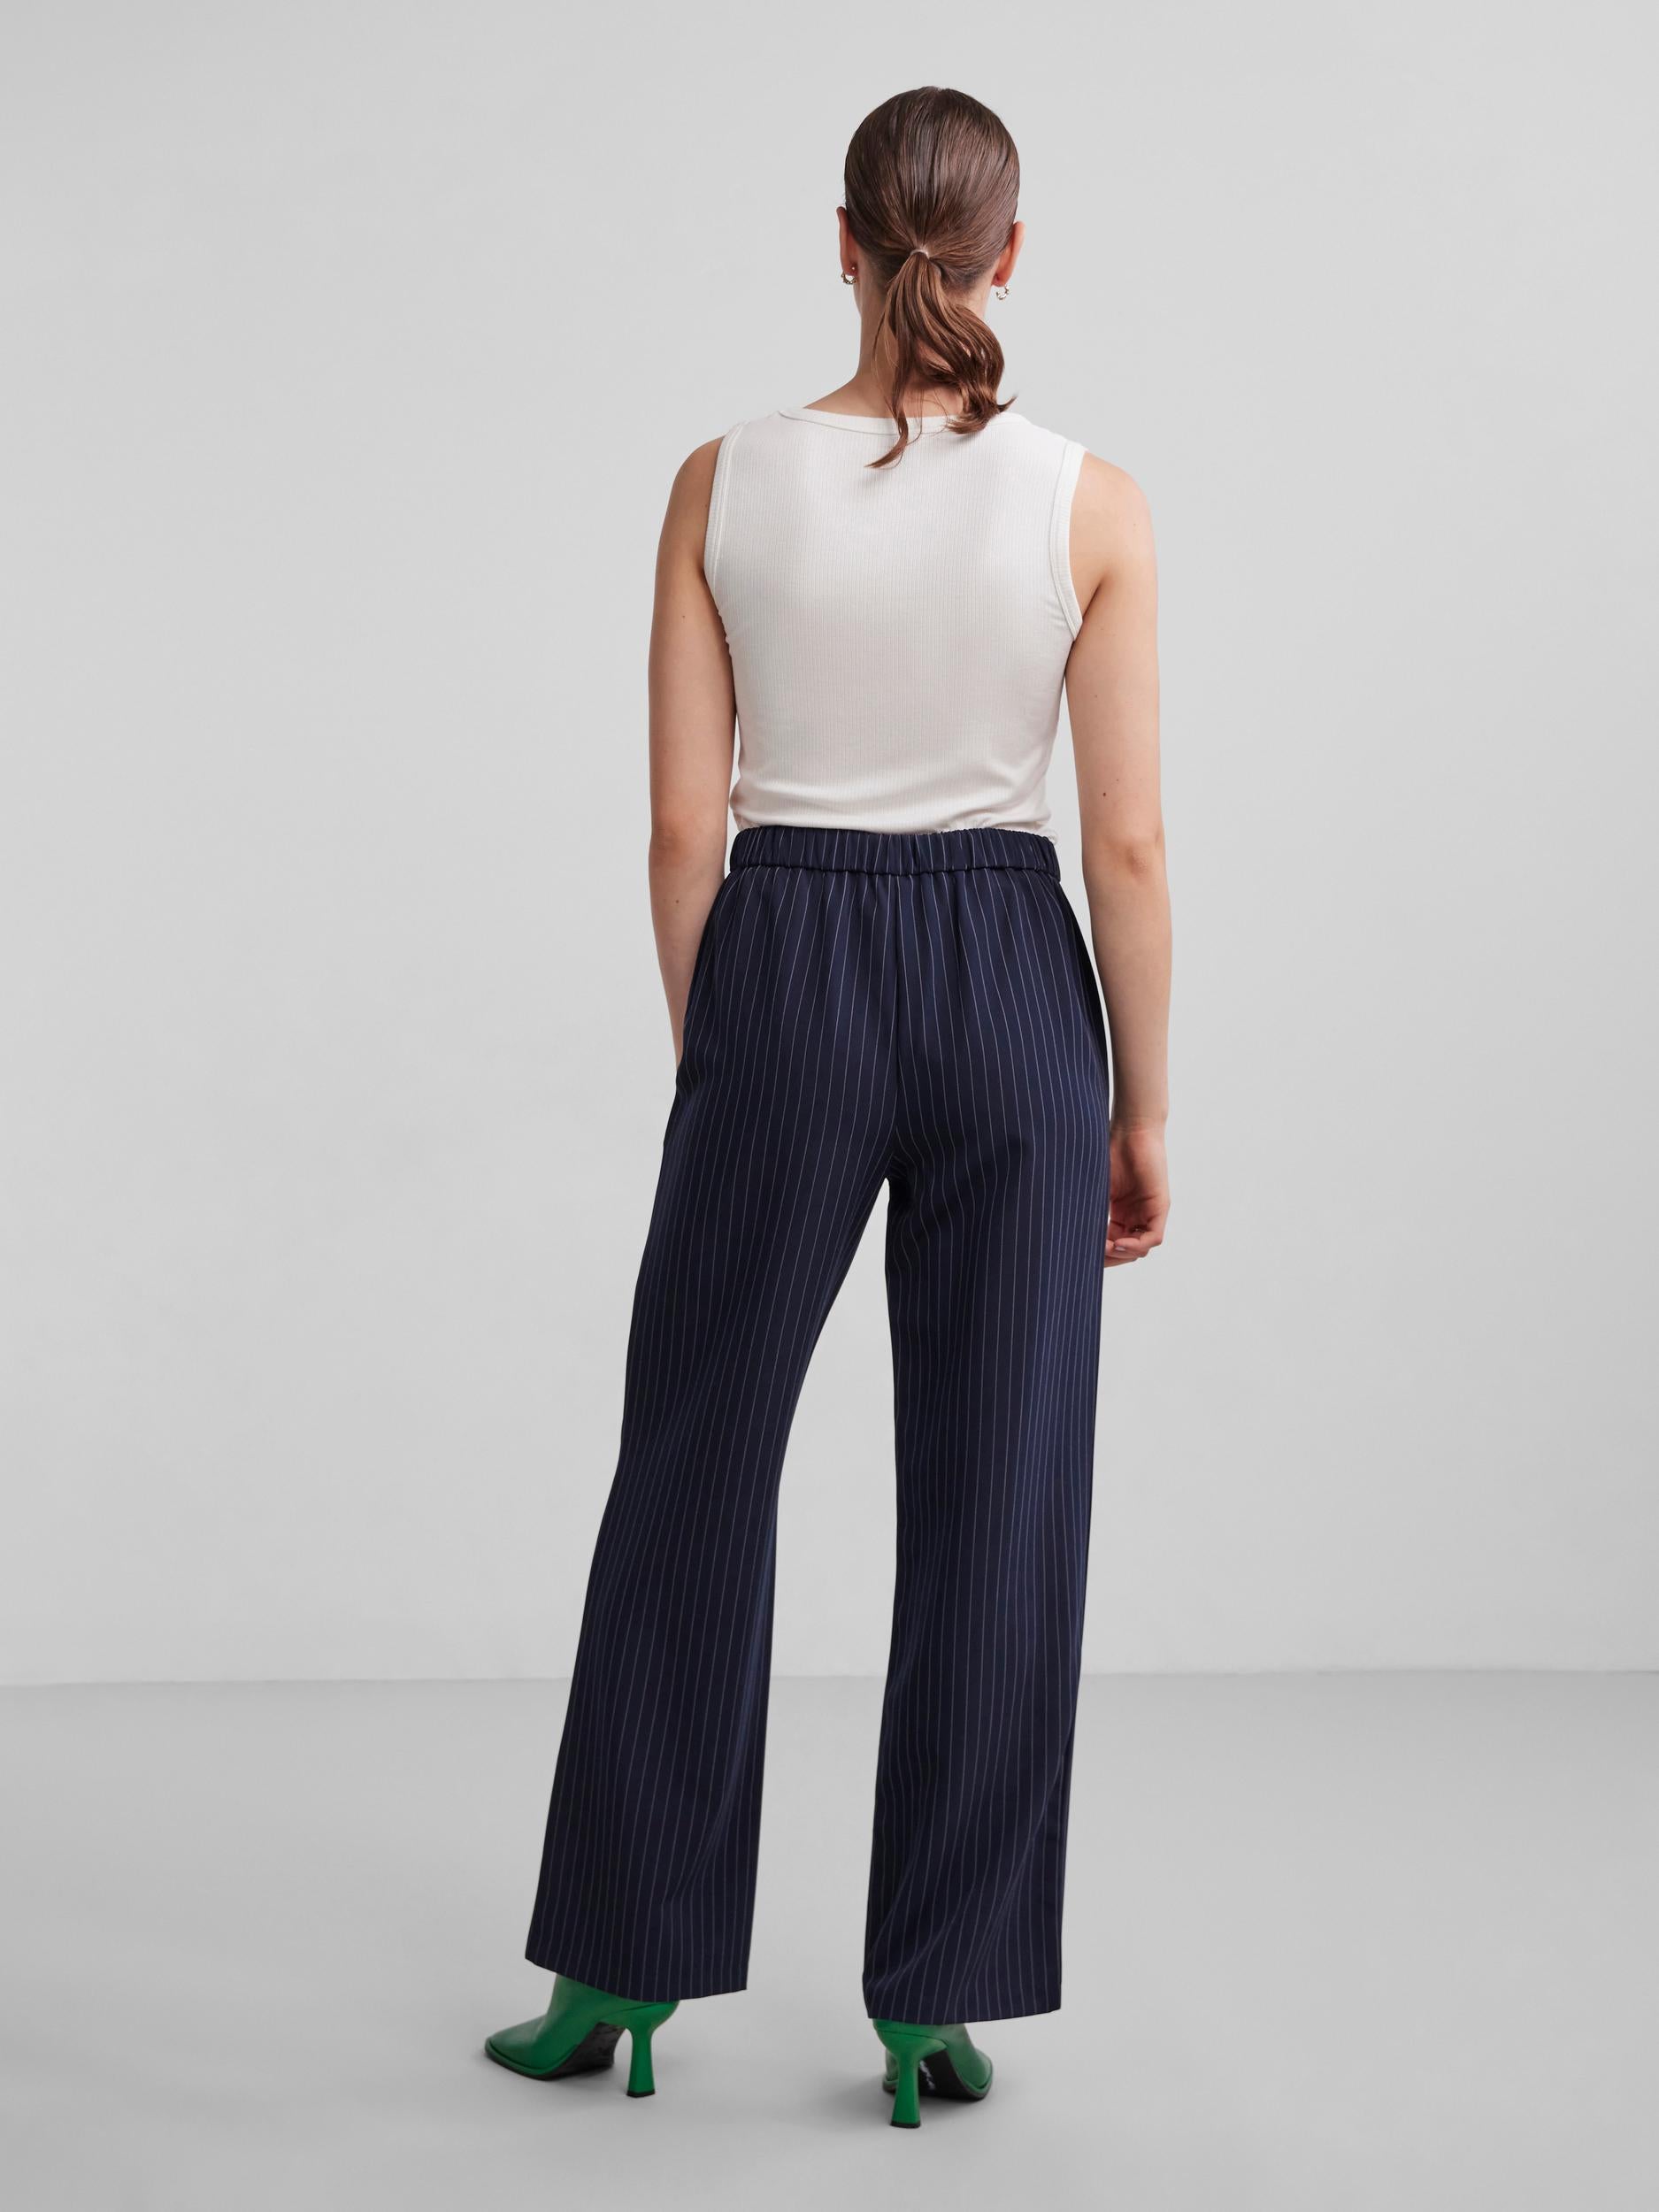 Pieces Bossy wide pants - Navy stripe